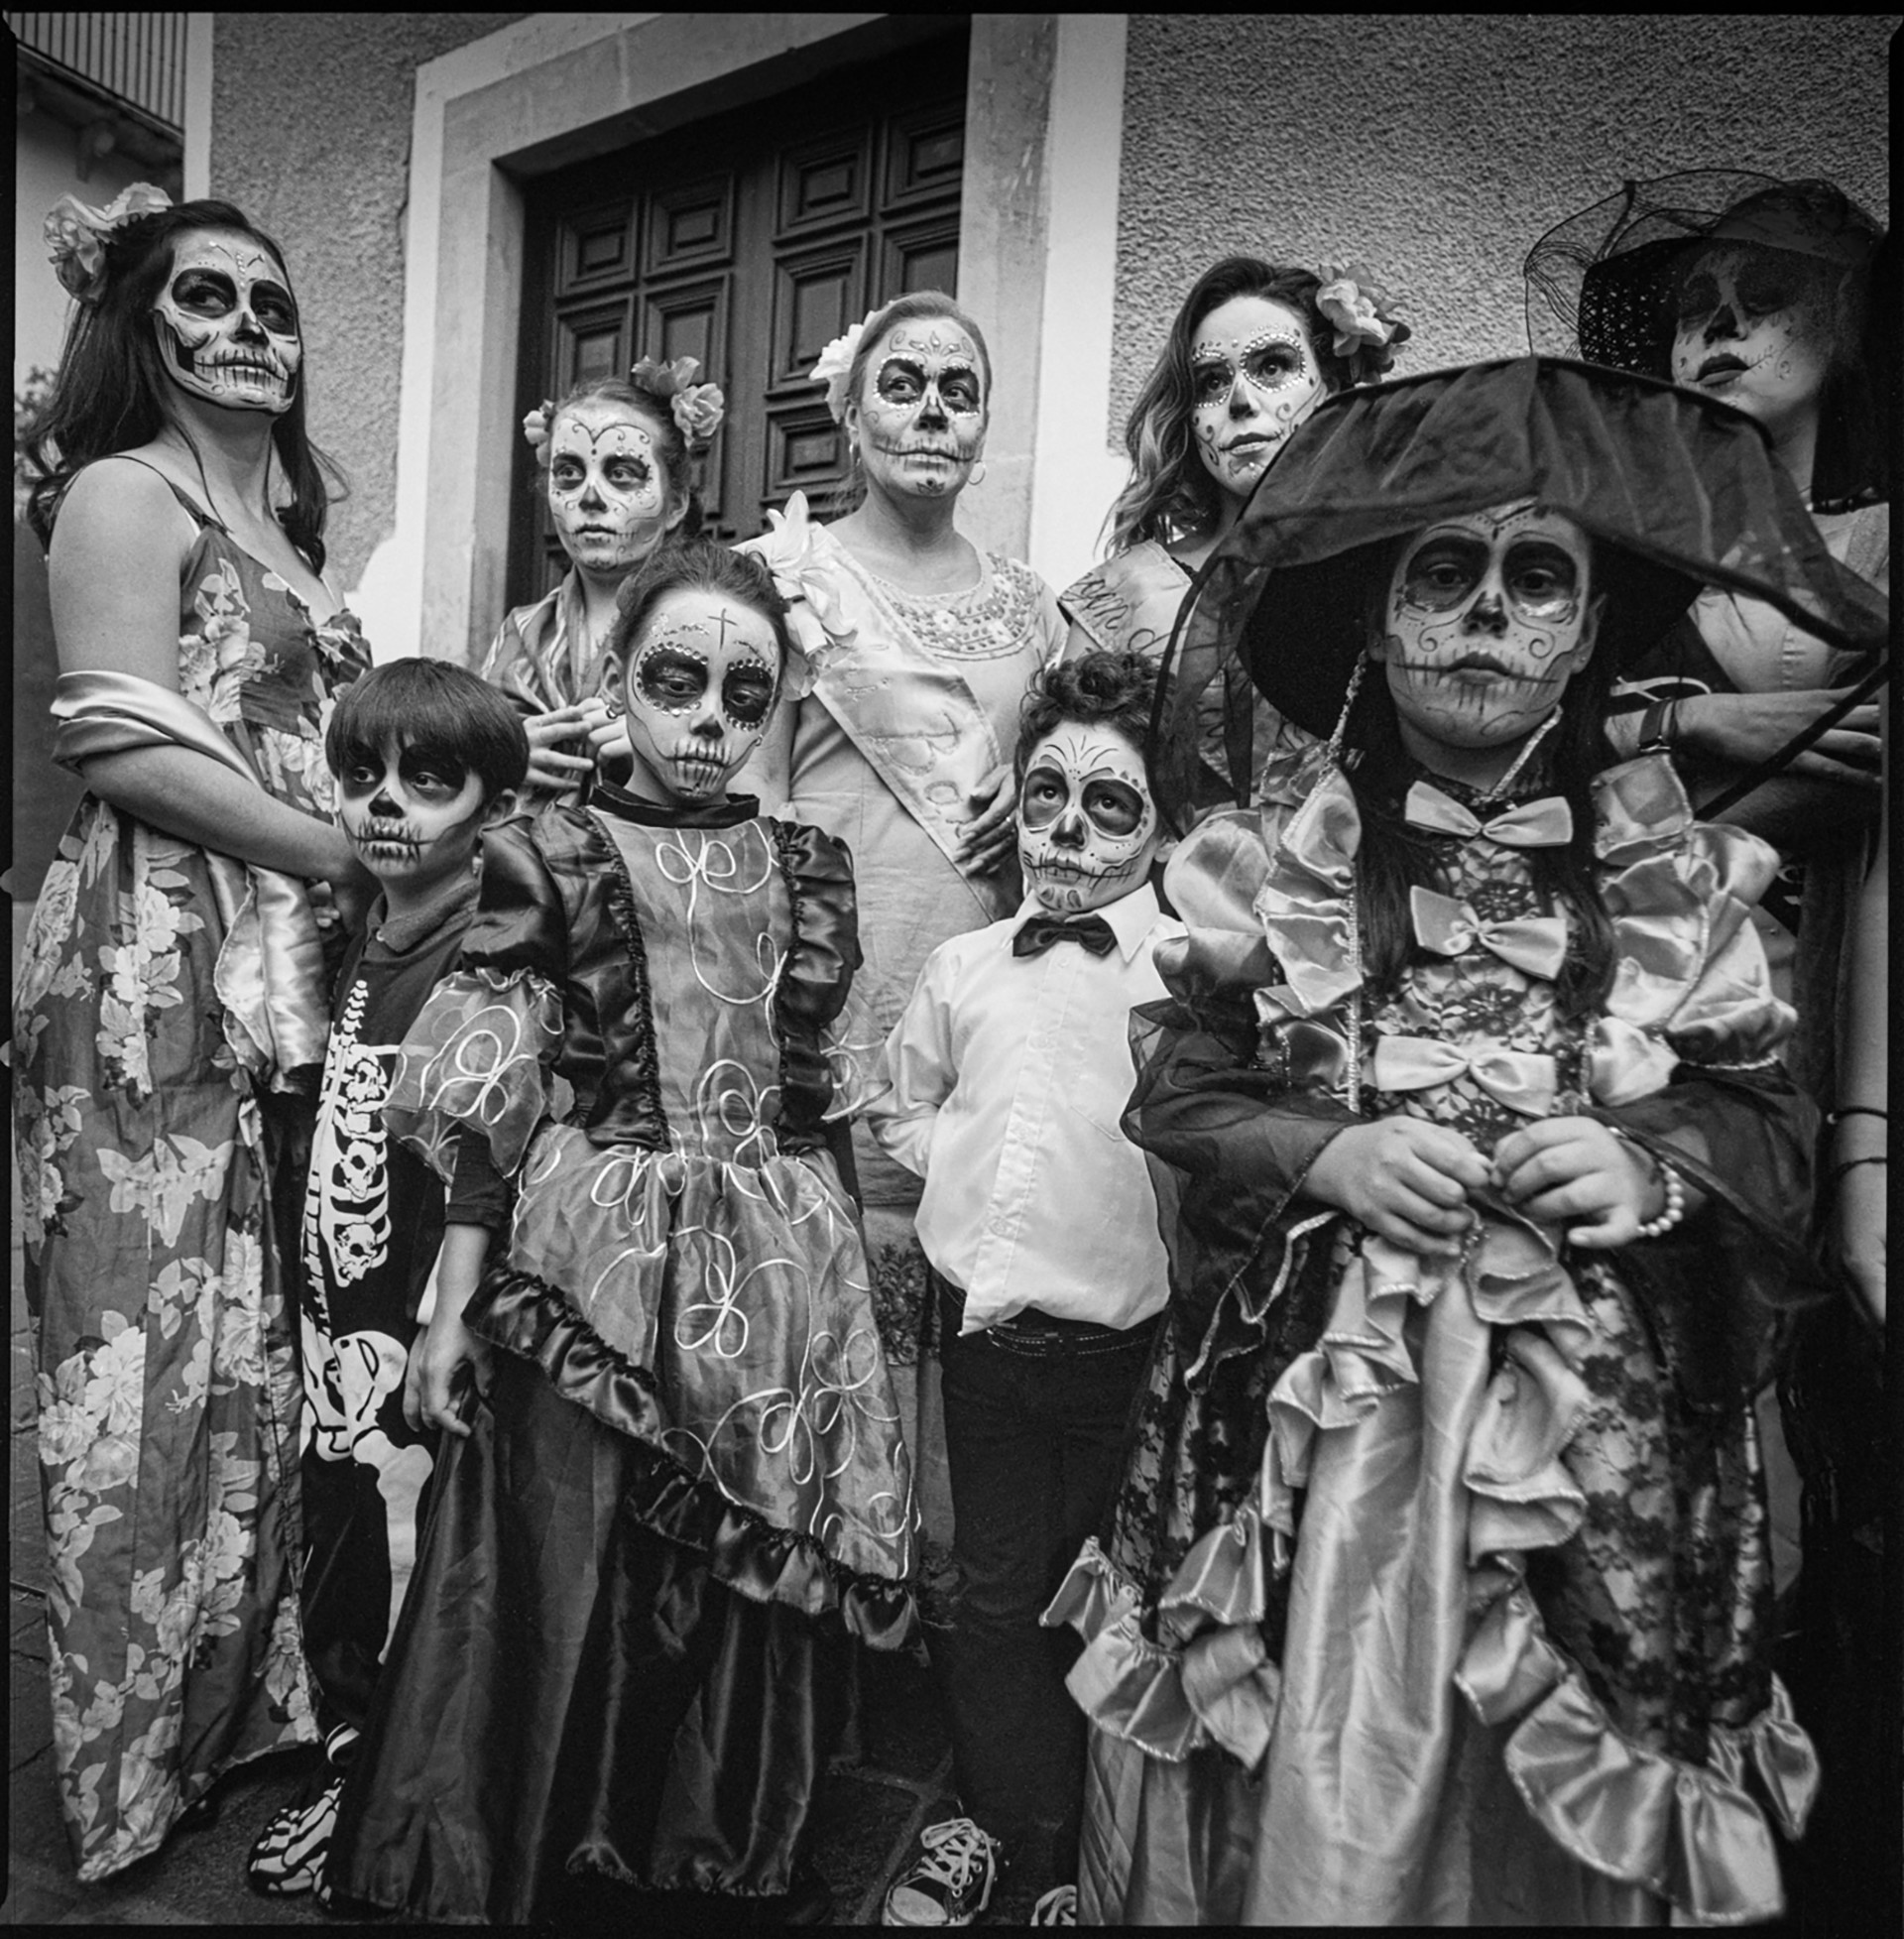 Day of the Dead Gathering - Guanajuato, Mexico by Kevin Greenblat